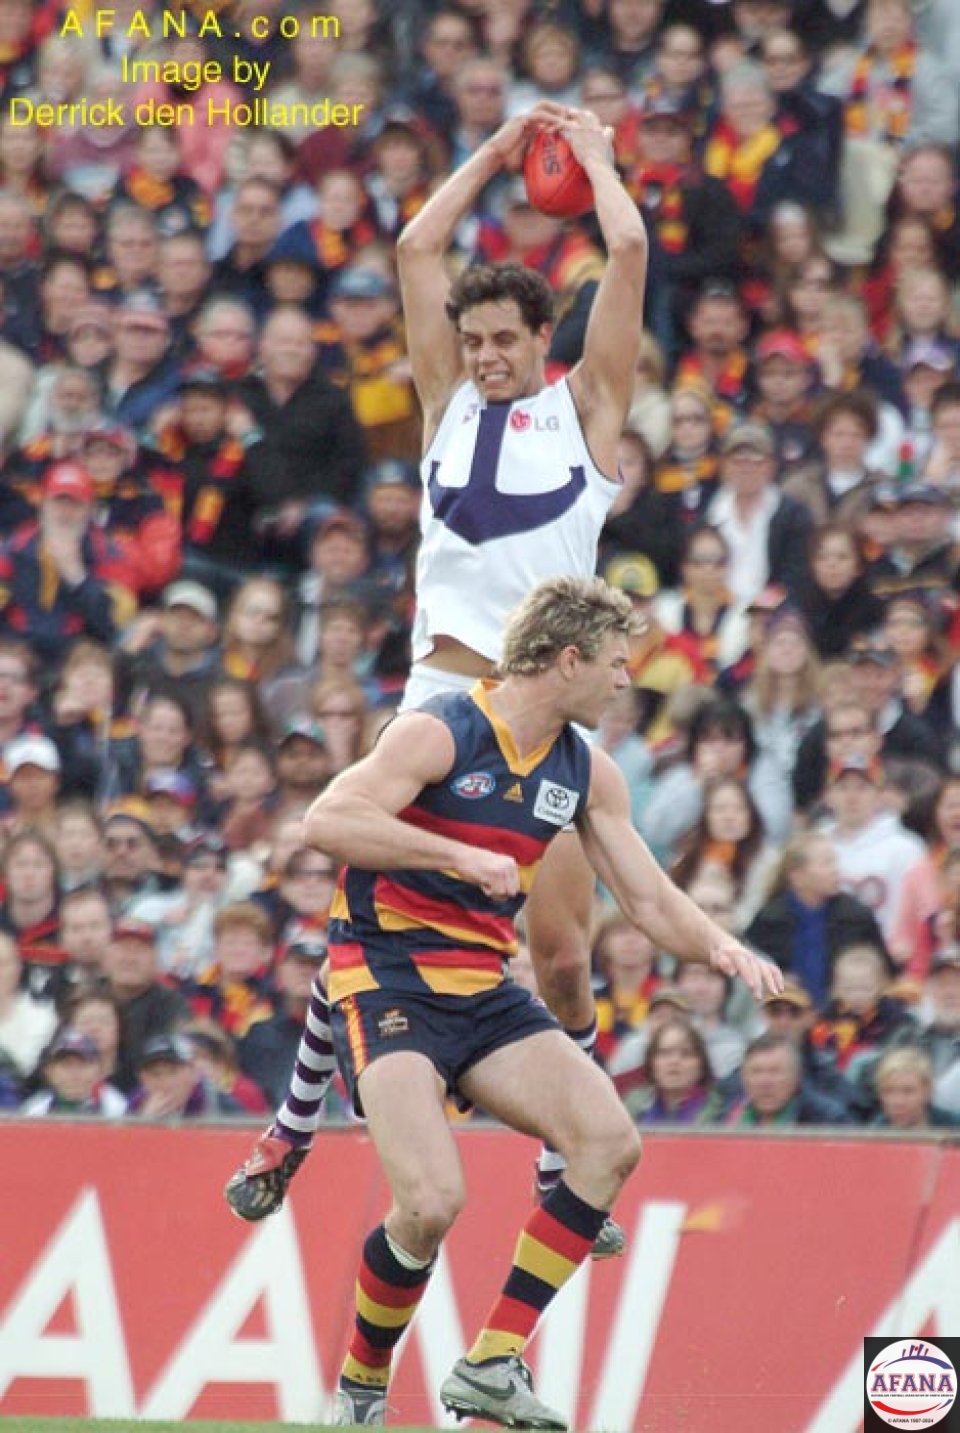 [b]A soaring attempted mark by Fremantle in defense[/b]